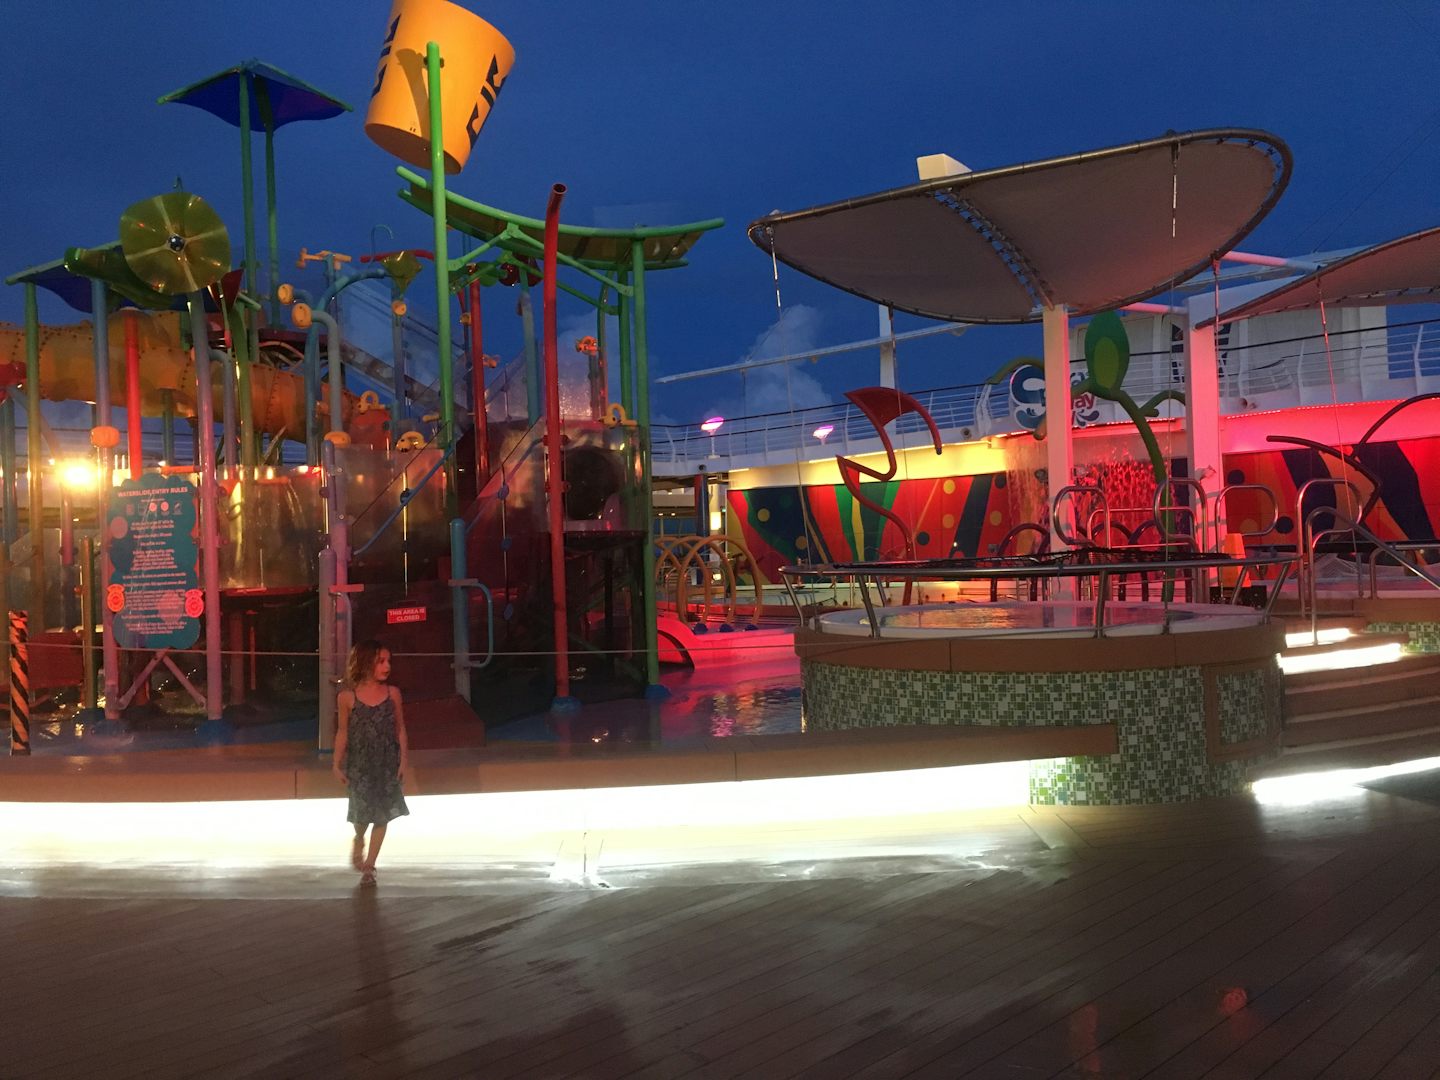 Kids water play area at night